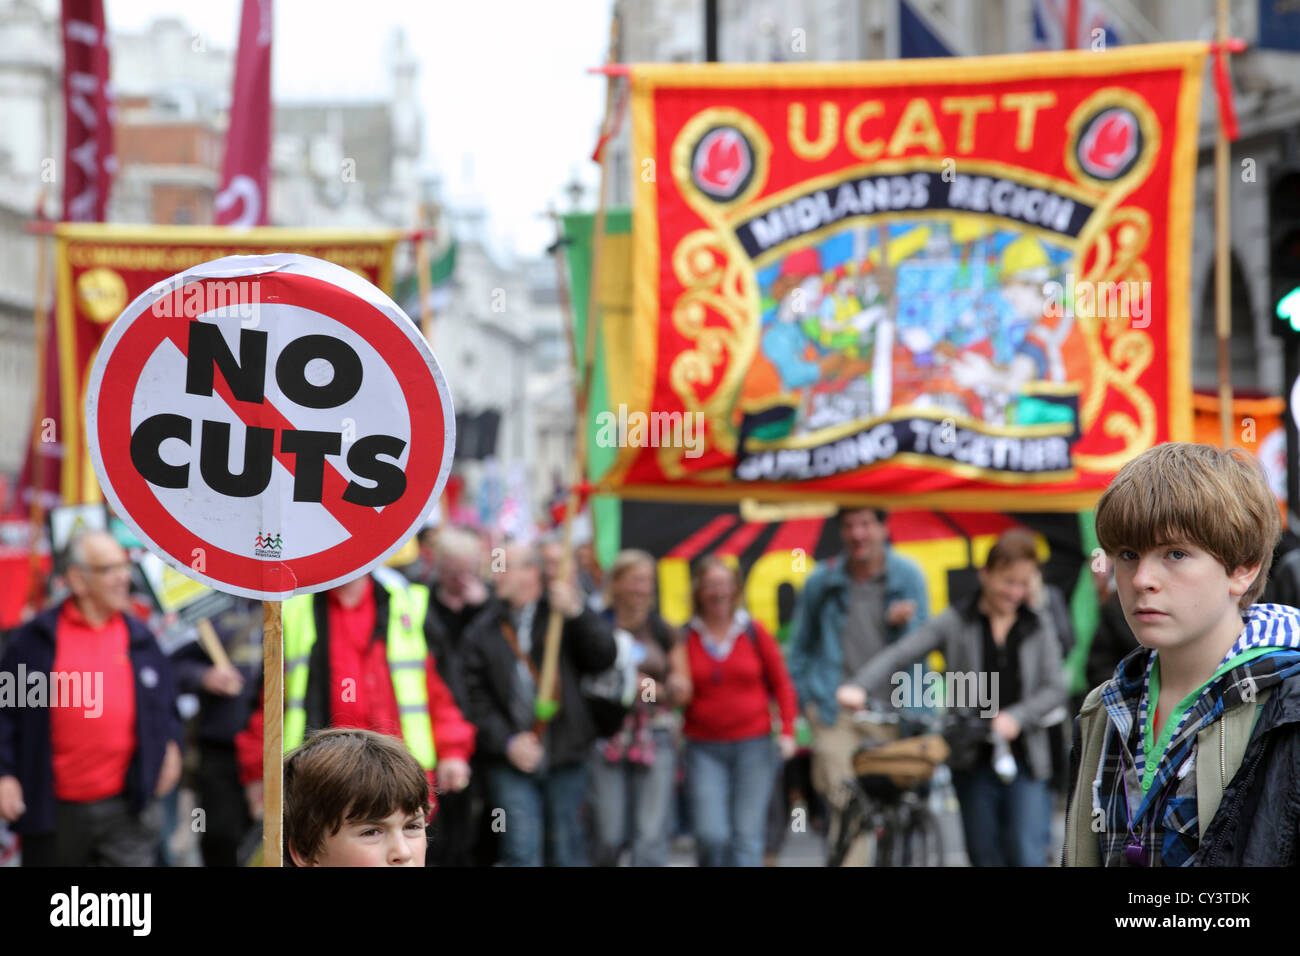 Children at A Future That Works - TUC march & rally, central London. Anti-Cuts anti austerity mass protest movement Stock Photo